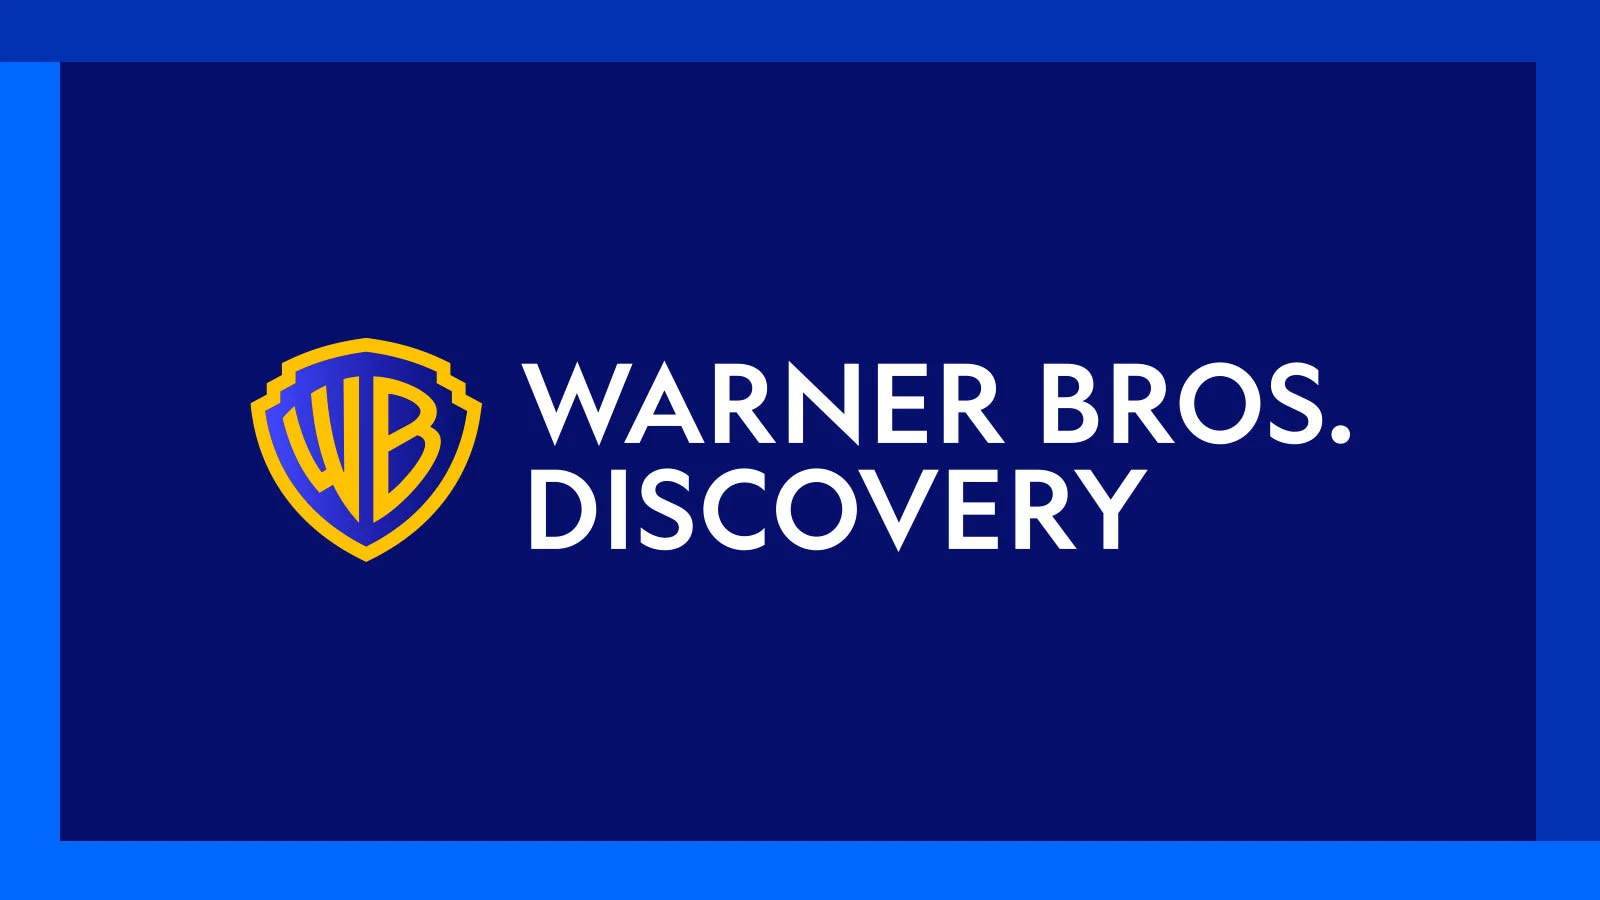 'Warner Bros. Discovery' plans to rebrand DC